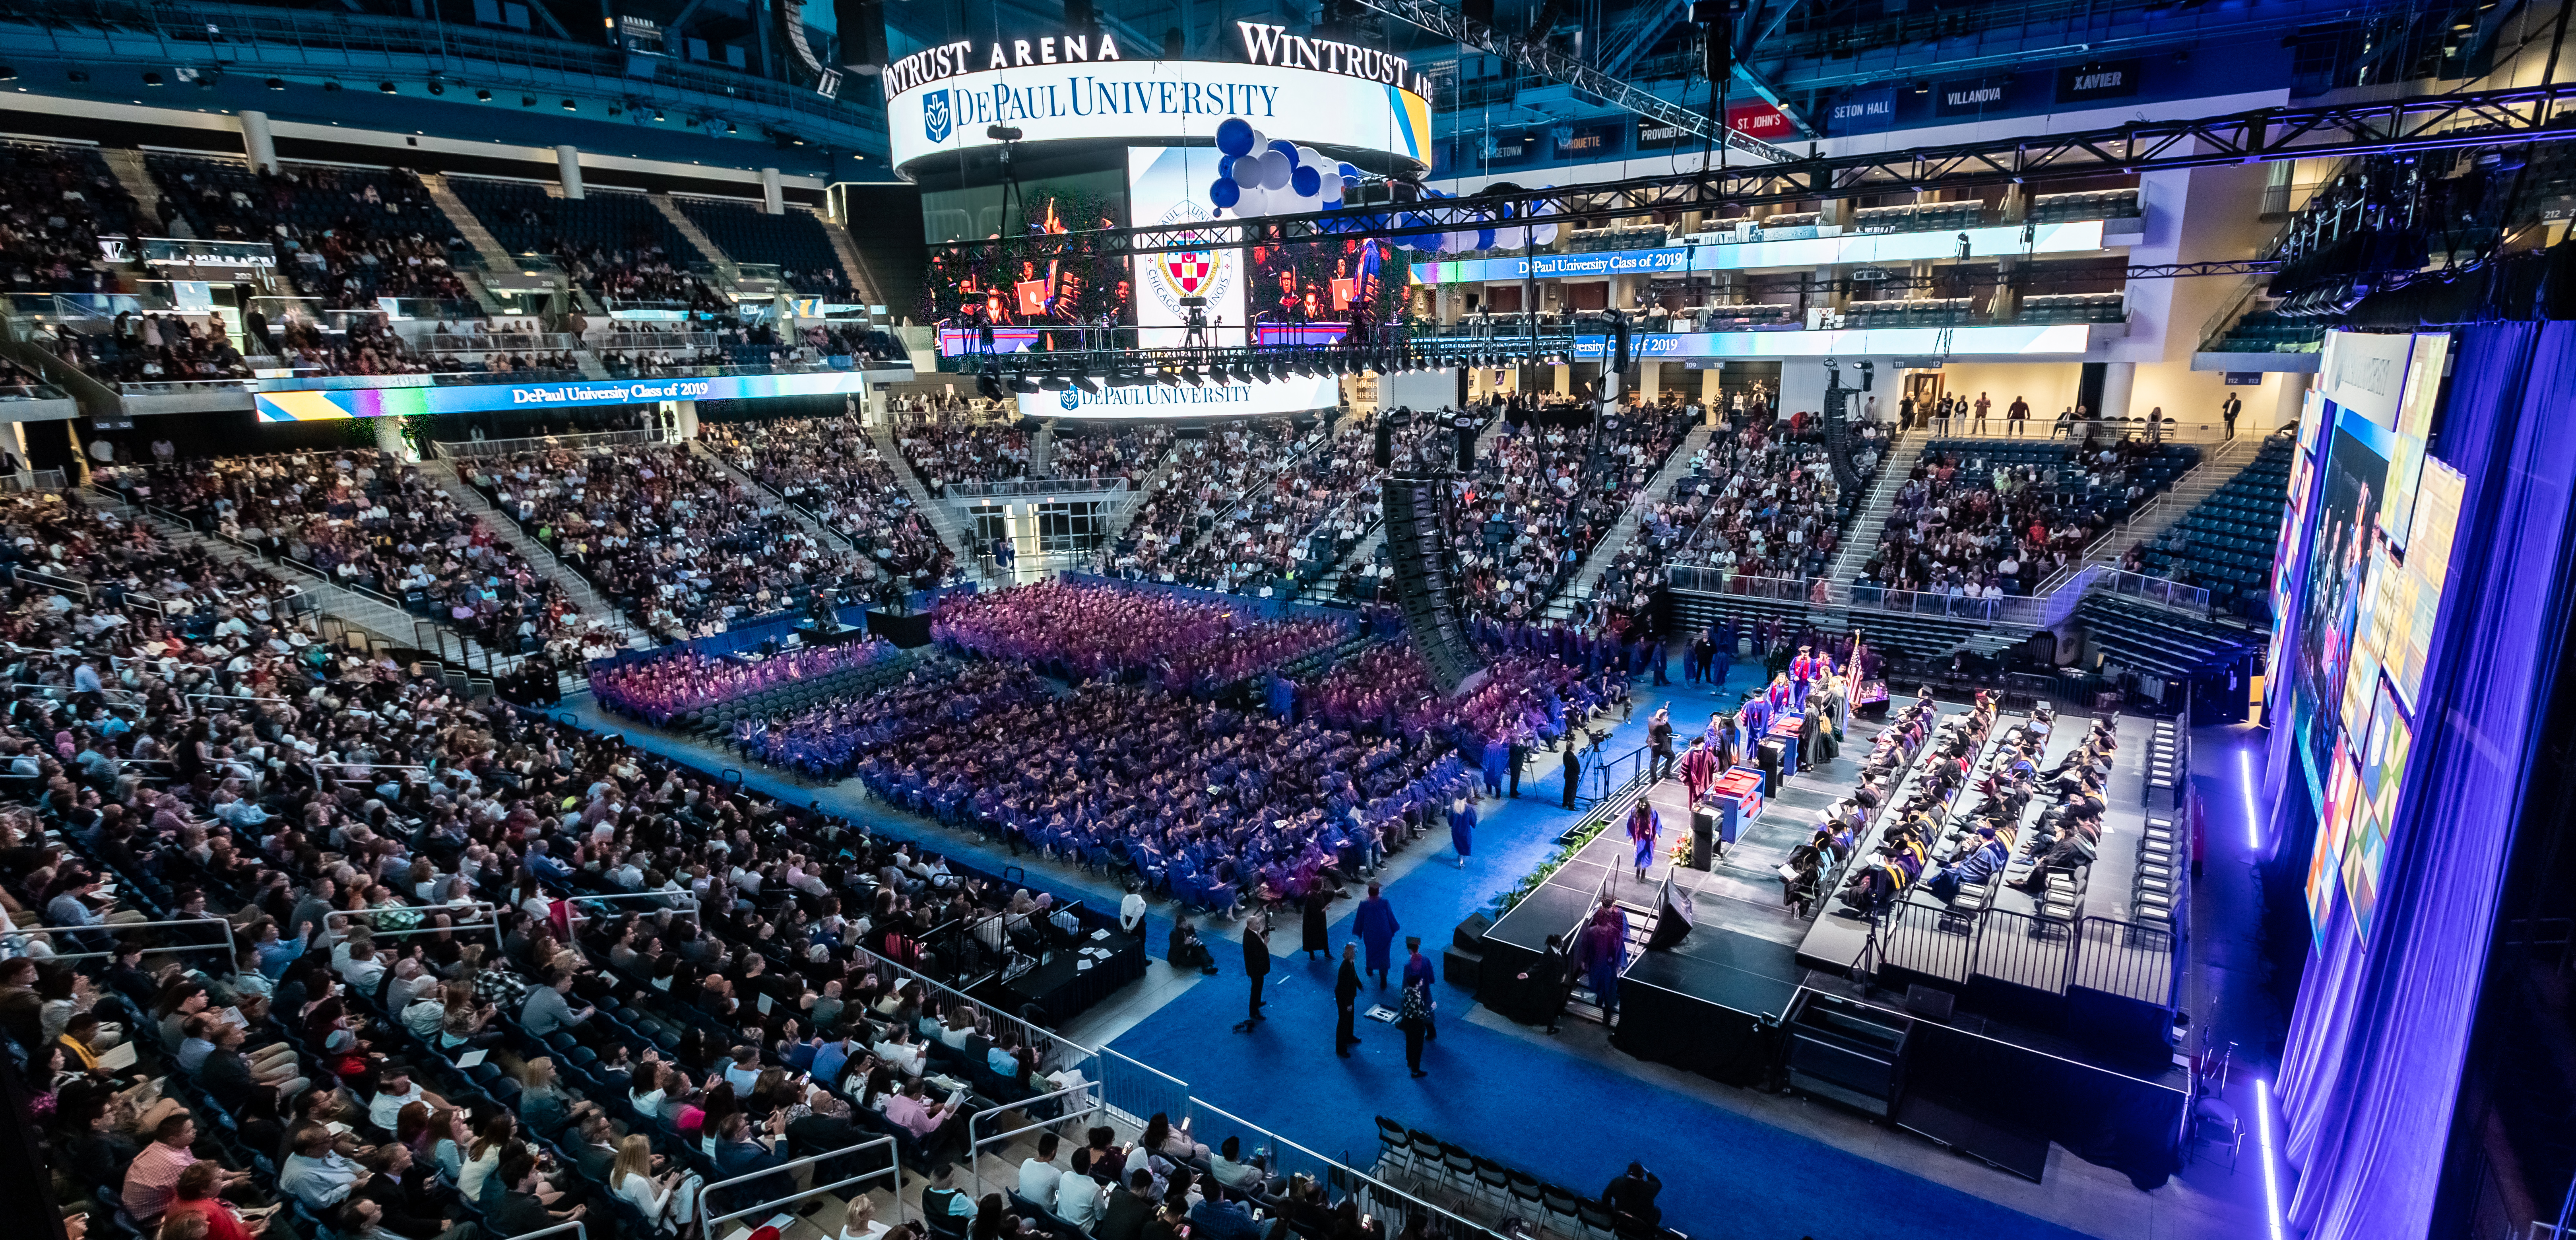 Depaul Calendar 2022 Depaul Announces In-Person Commencement Schedule For Class Of 2022 | Campus  And Community | Sections | Depaul University Newsline | Depaul University,  Chicago